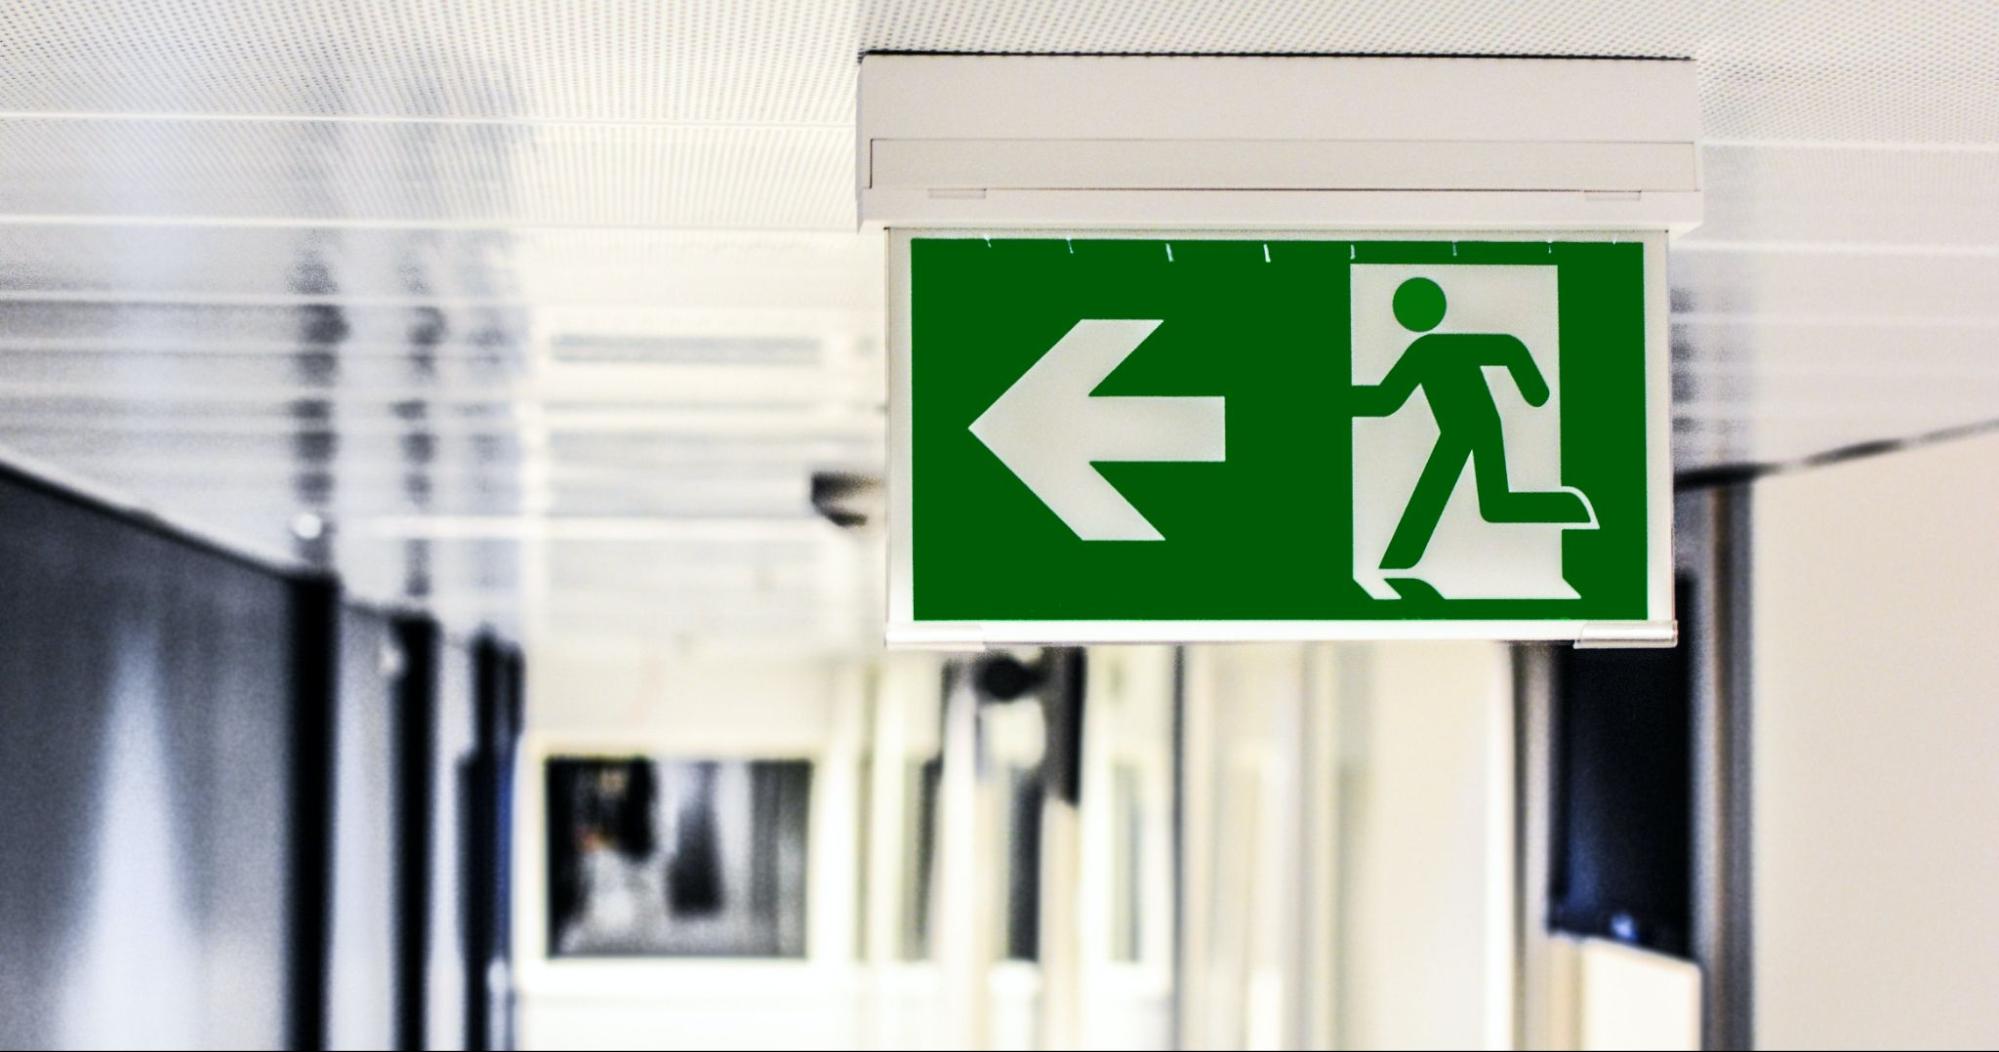 Emergency exit sign with running man icon and left direction arrow mounted on ceiling corridor